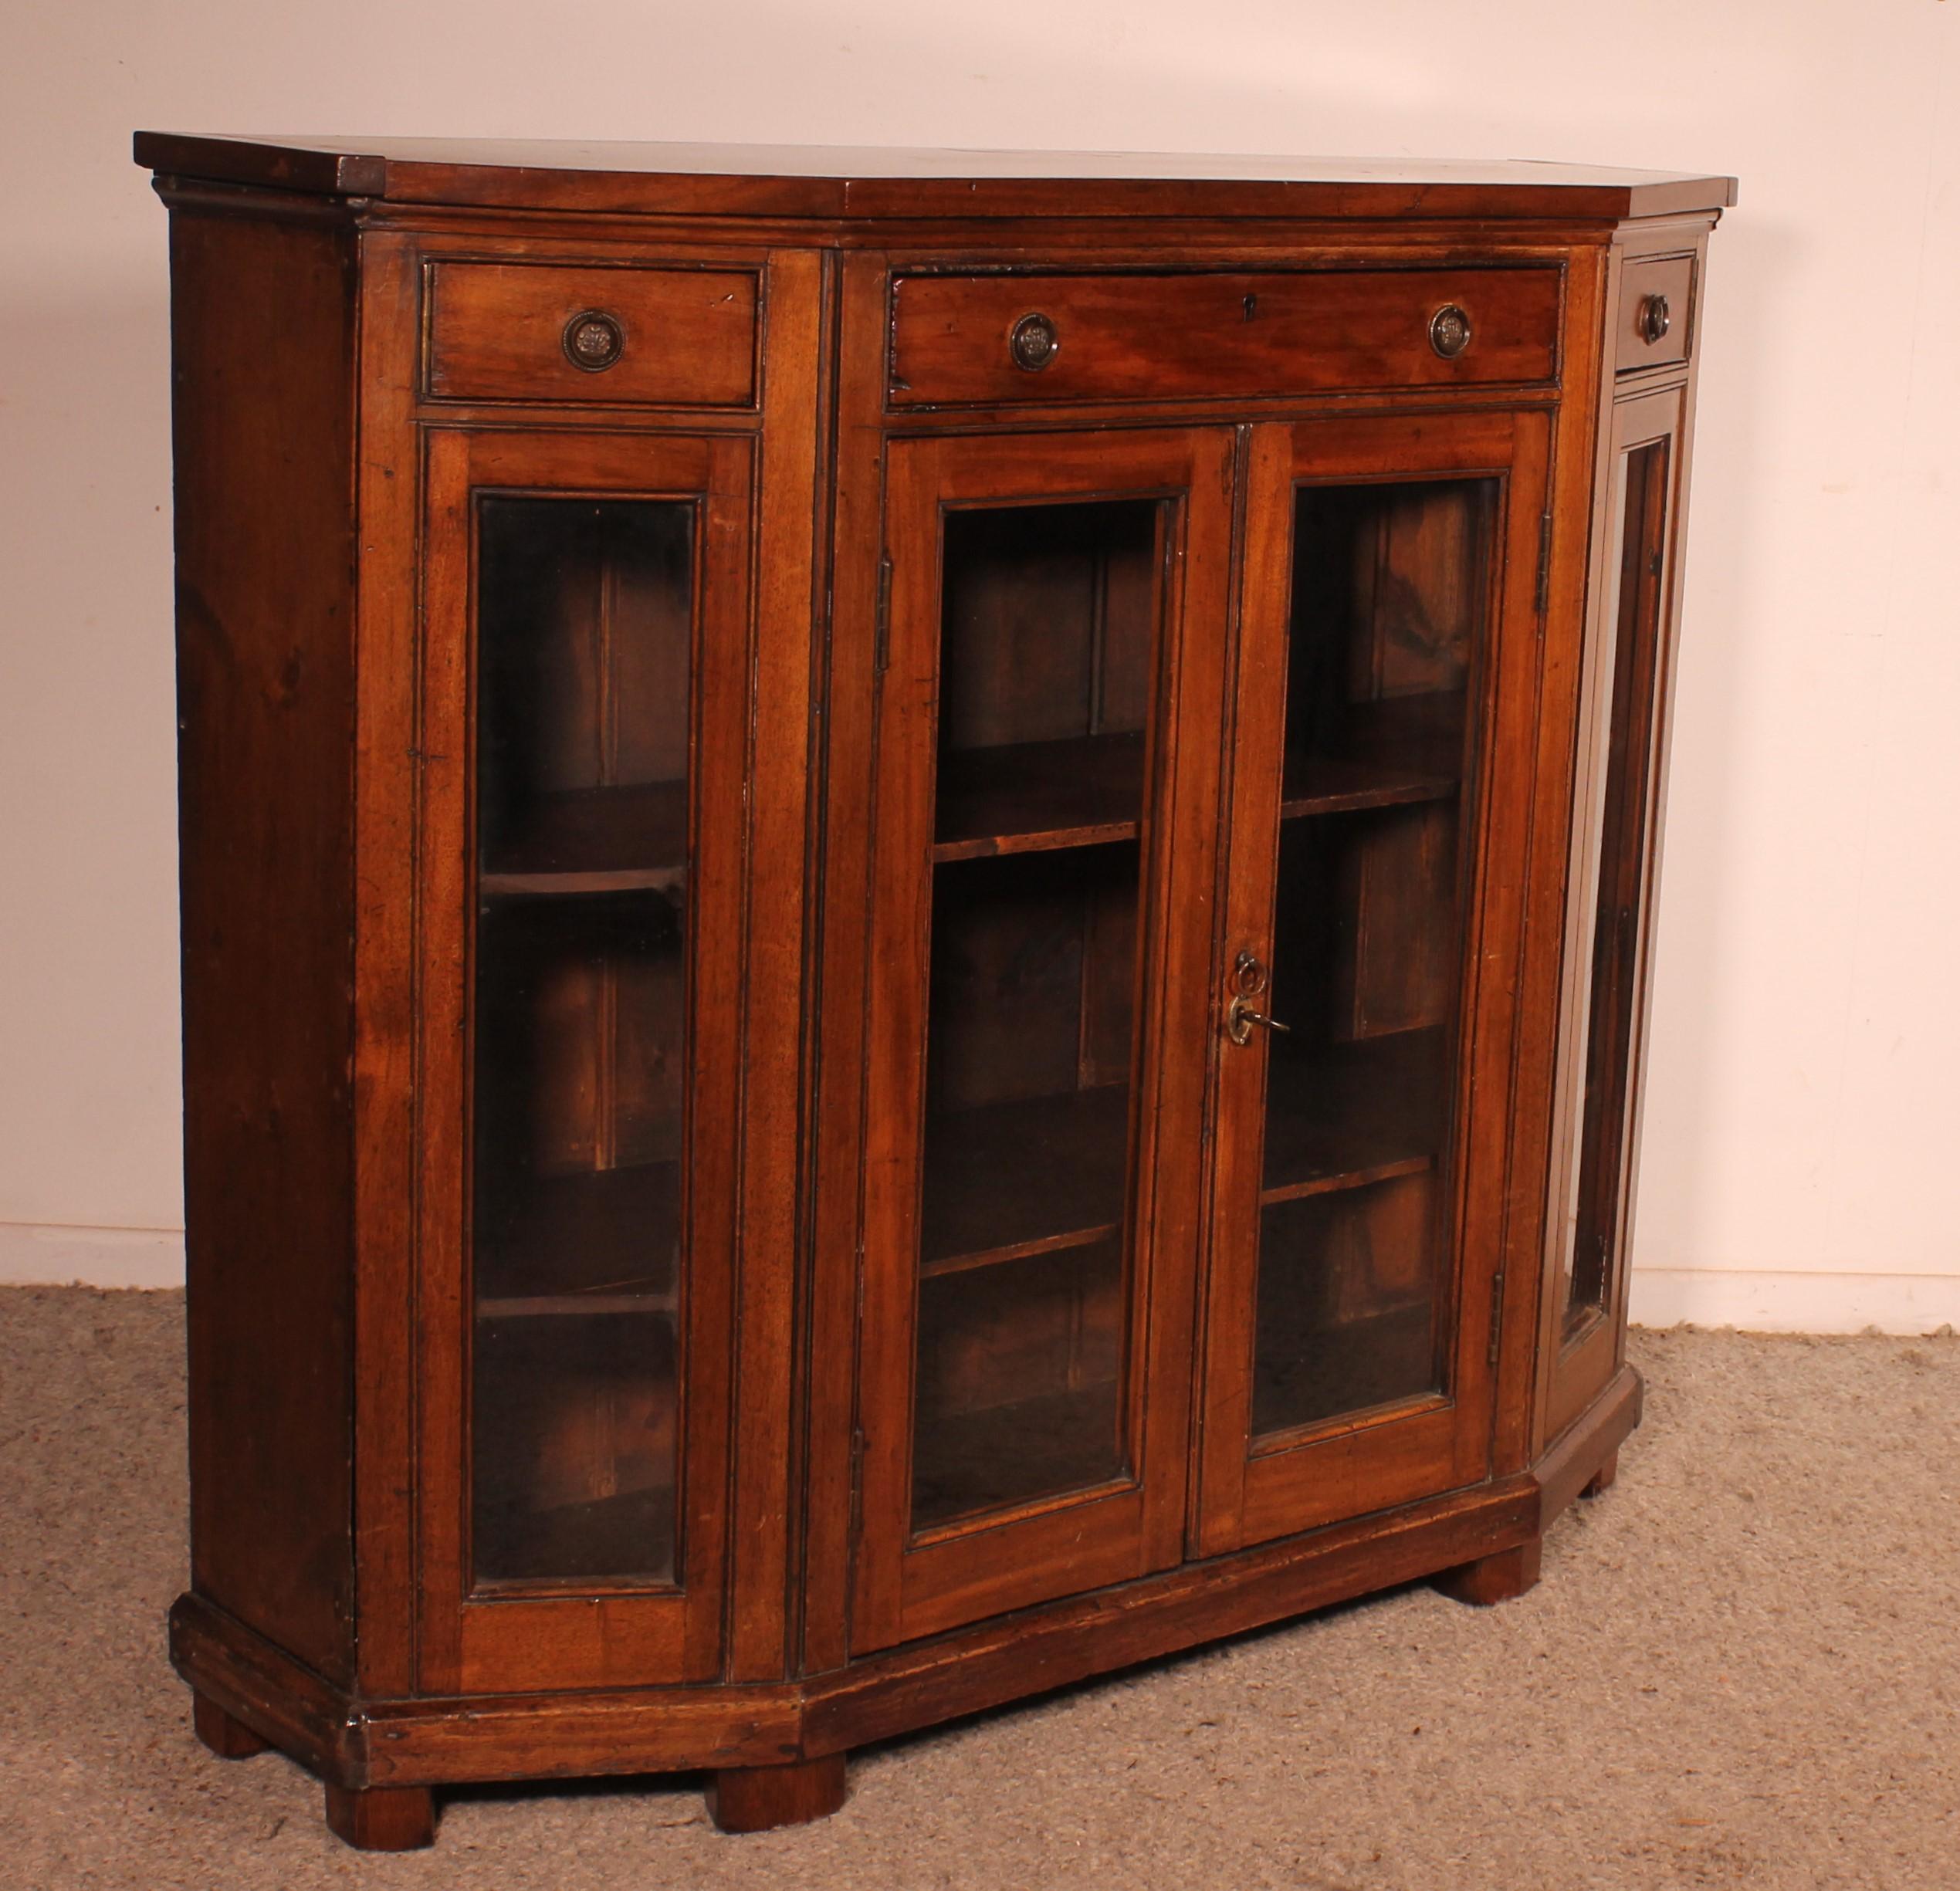 Store Showcase Cabinet Or Bookcase In Mahogany Early 19th Century In Good Condition For Sale In Brussels, Brussels